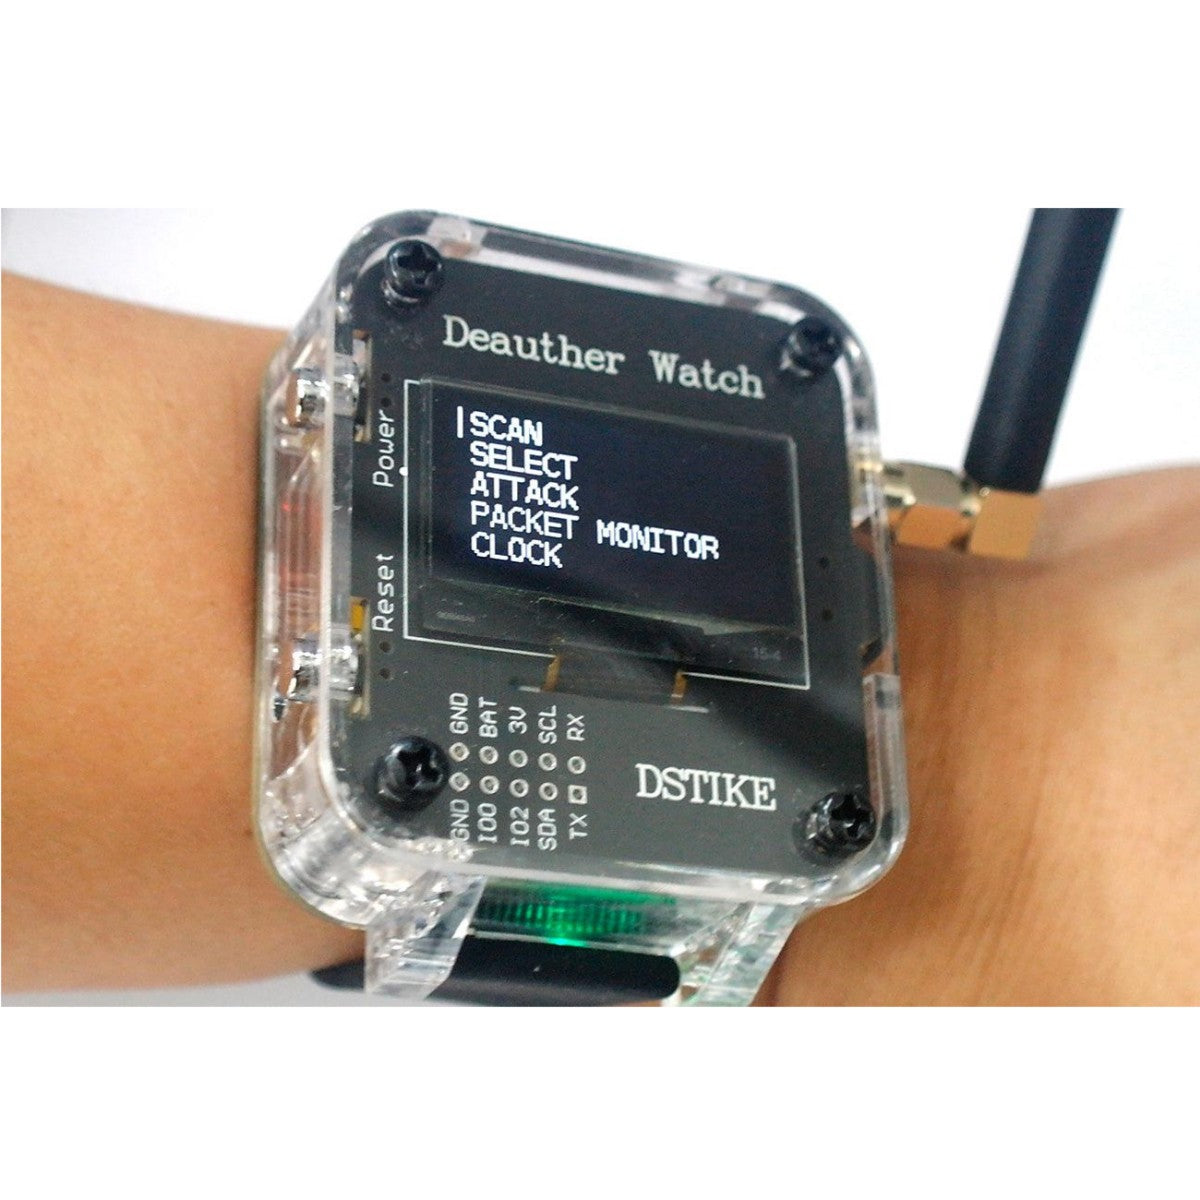 The Deauther watch reprogrammed - SOLVED - Programming Questions